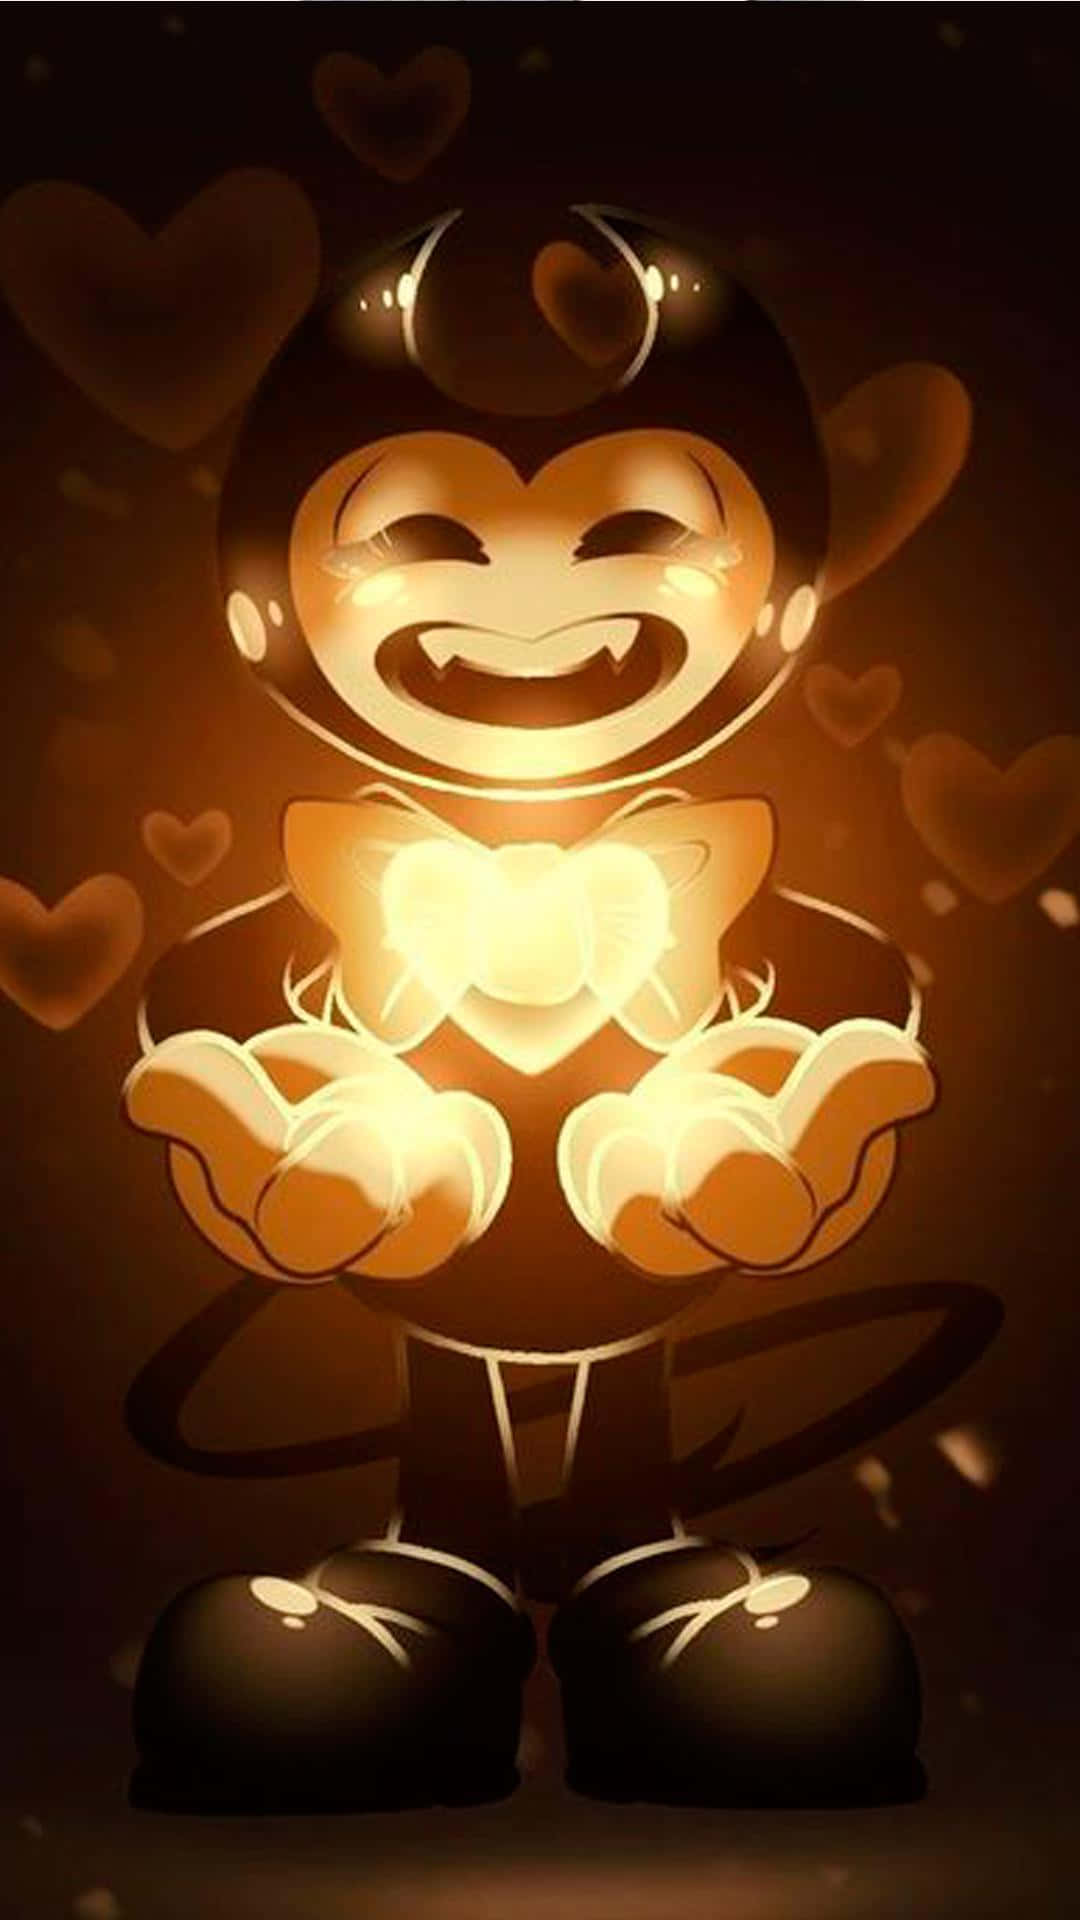 Bendy The Inkling With Hearts In His Hands